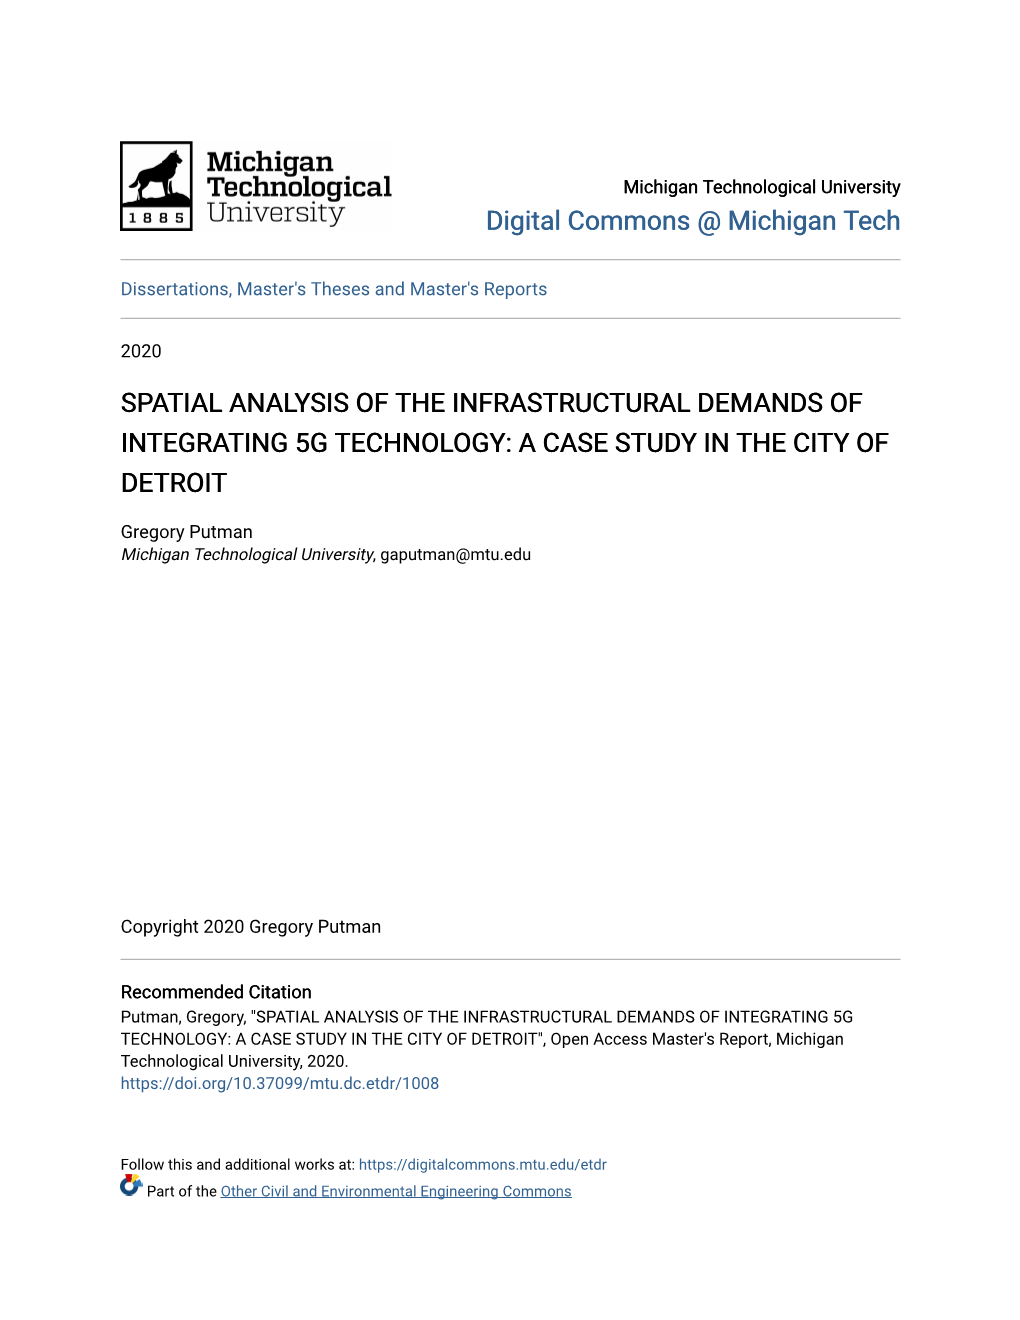 Spatial Analysis of the Infrastructural Demands of Integrating 5G Technology: a Case Study in the City of Detroit